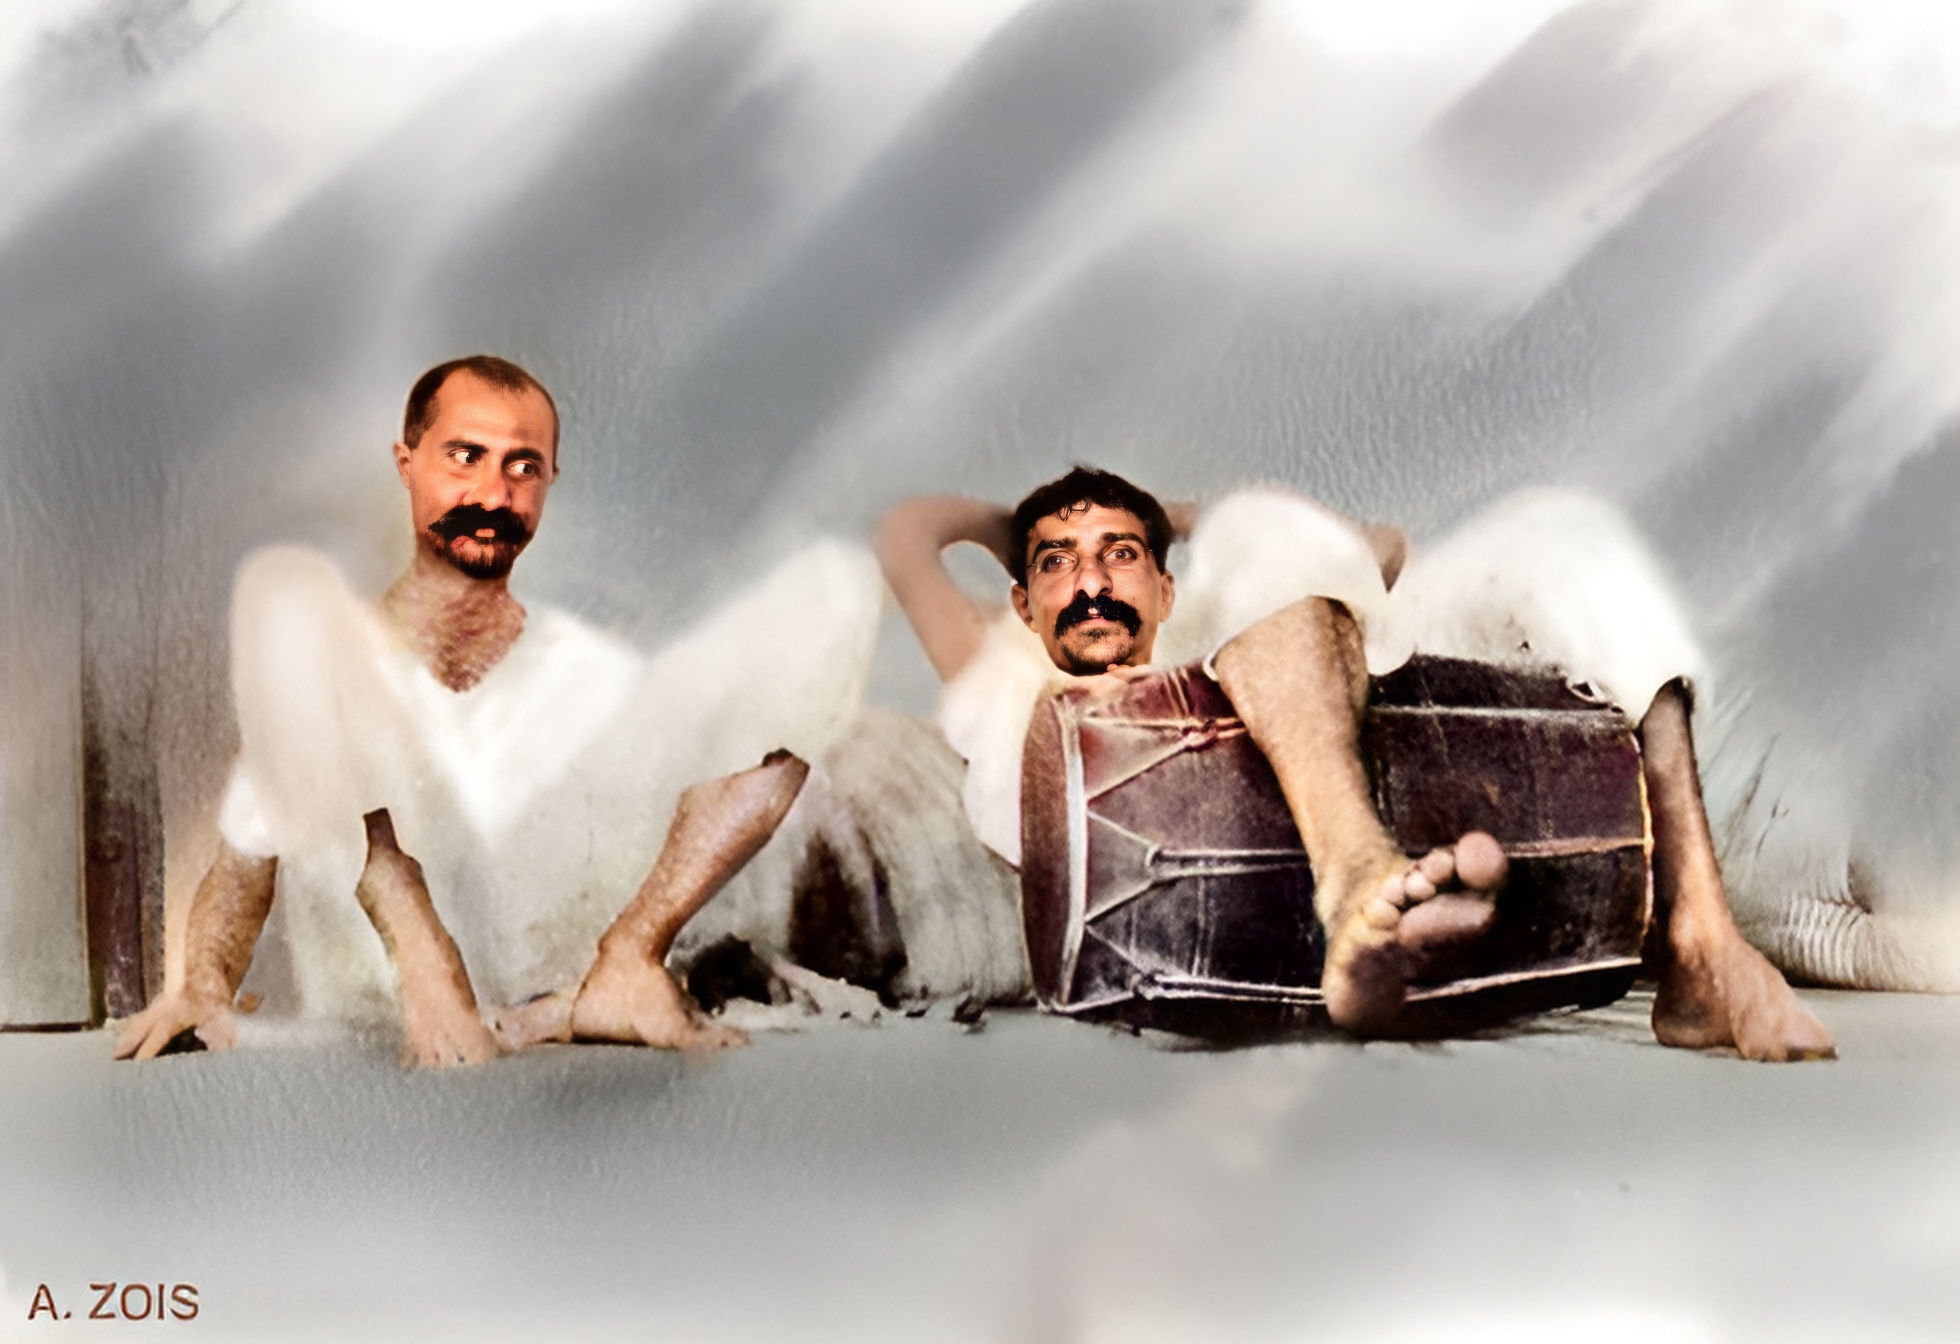 1922 - Bombay : Meher Baba and a dholak drum relaxing with Gustadji. Image rendered by Anthony Zois.